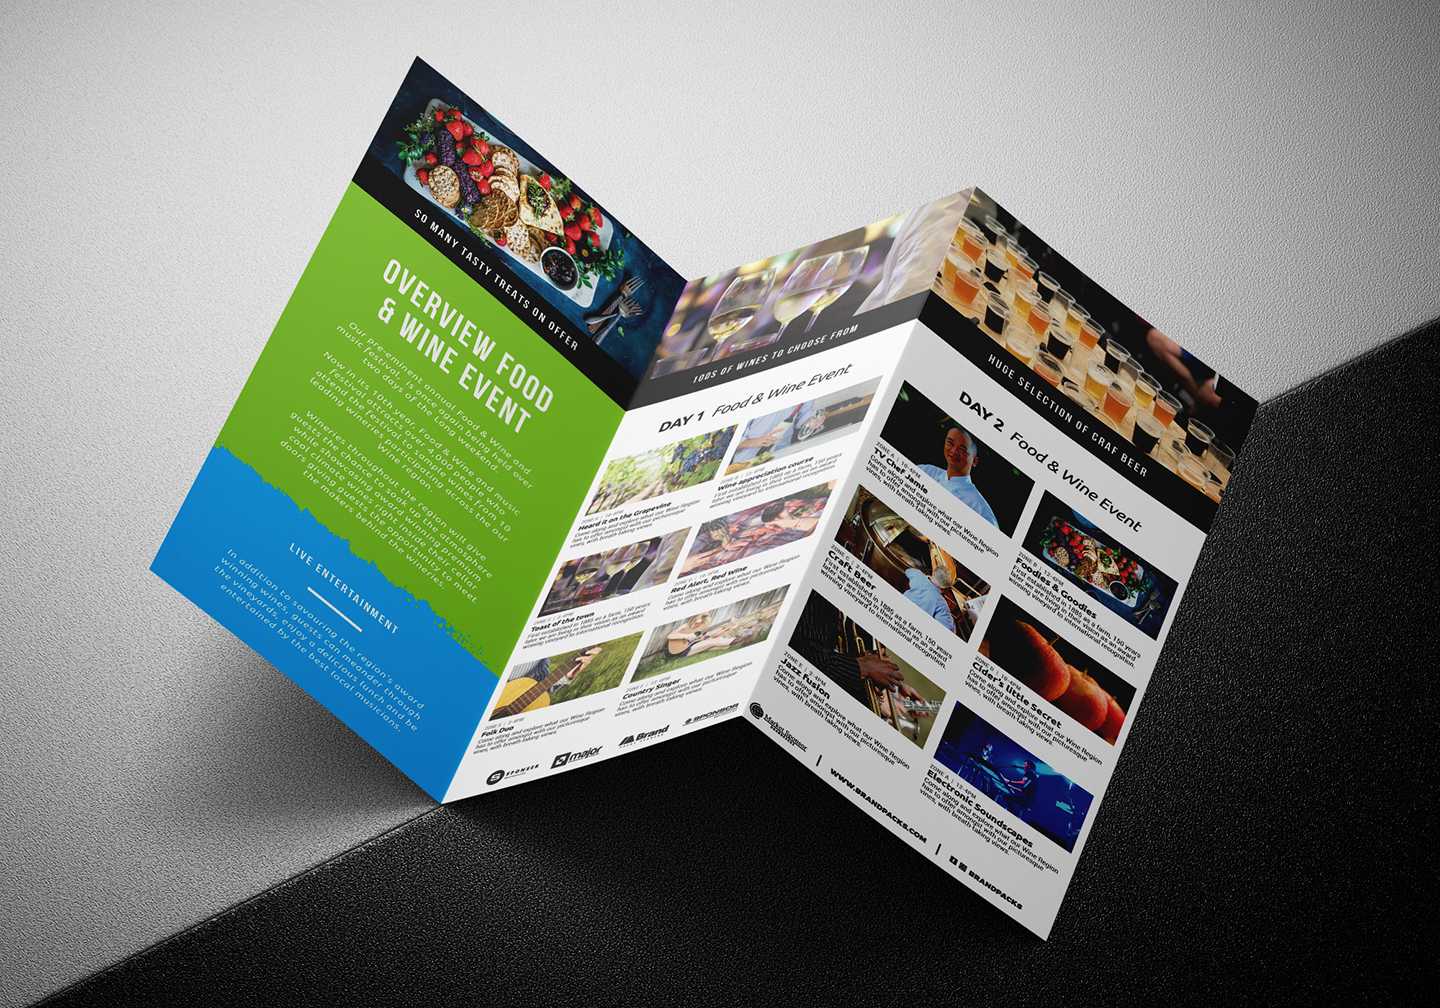 Free Tri Fold Brochure Template For Events & Festivals – Psd Within Brochure 3 Fold Template Psd